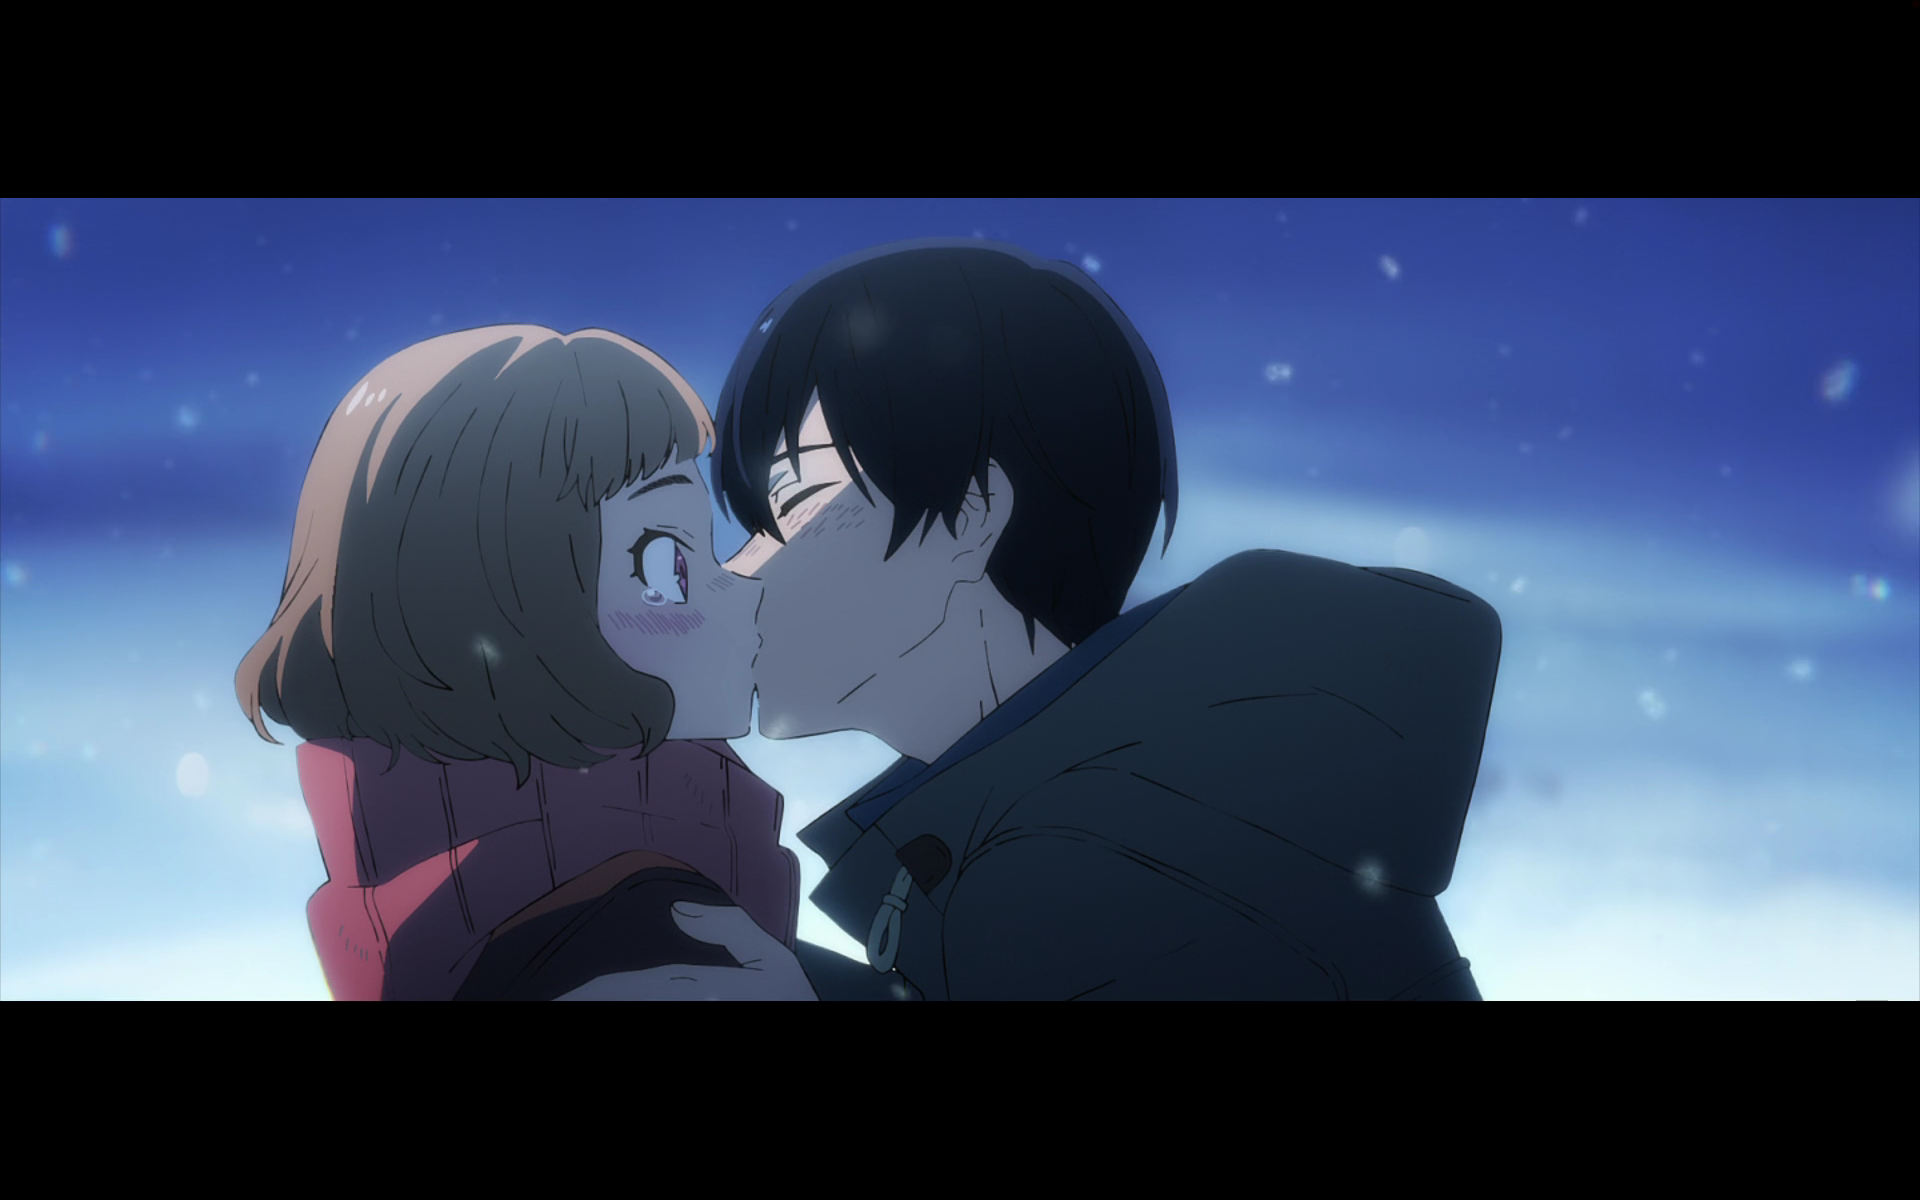 Anime Films Movie Characters Kissing Snow Movie Screenshots Anime Girls Anime Boys Anime Screenshot  1920x1200